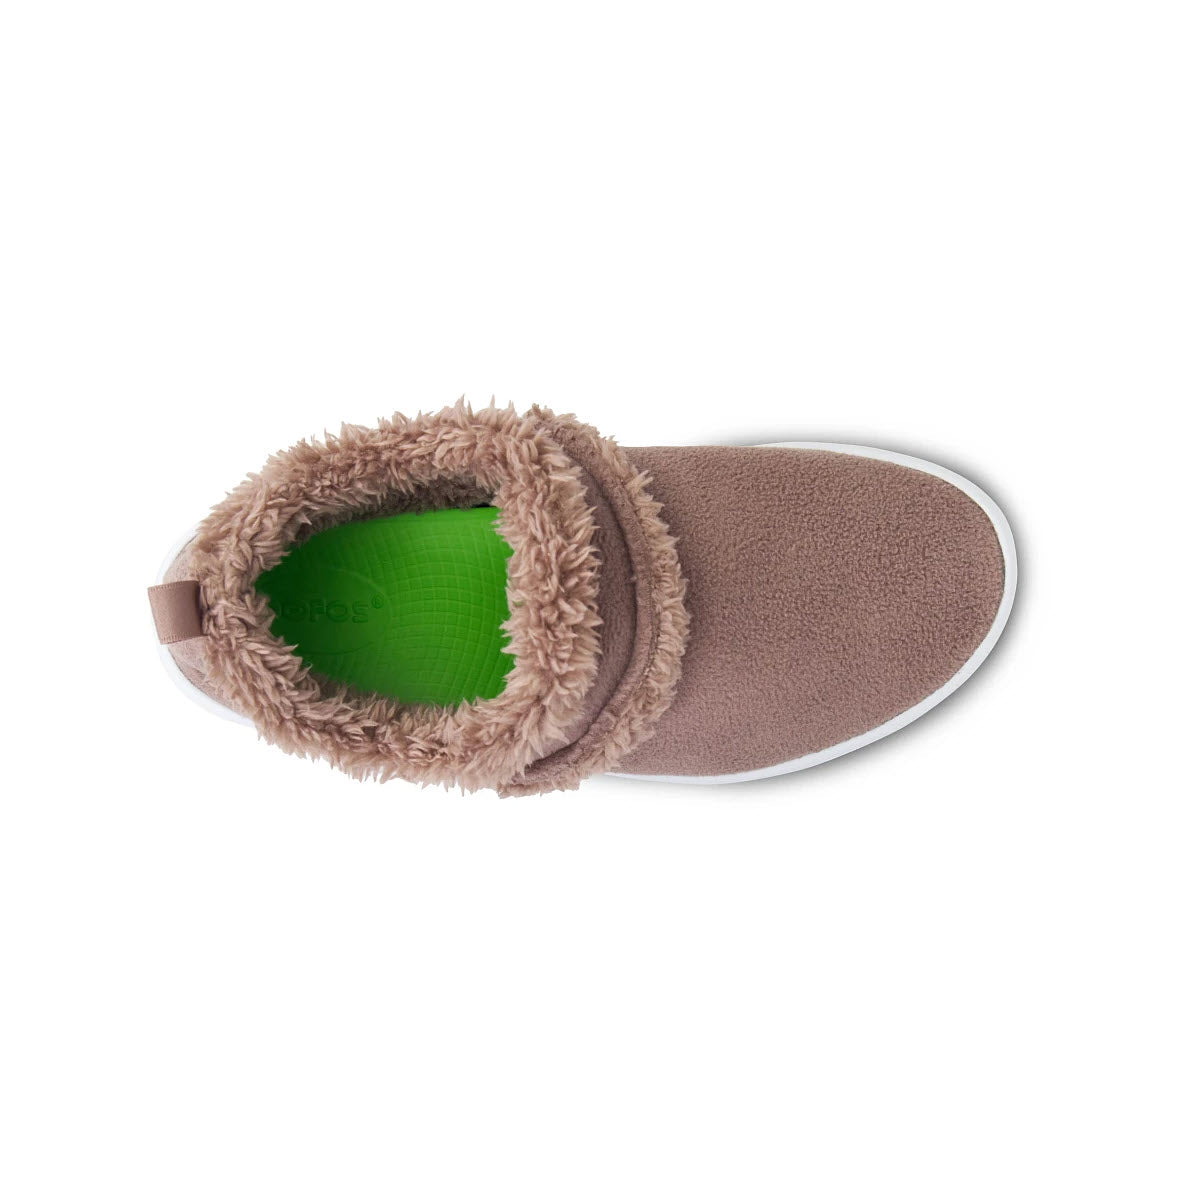 Top view of a single OOFOS OOCOOZIE LOW CHOCOLATE slipper with a fluffy lining and a green insole, designed with OOfoam technology, isolated on a white background.